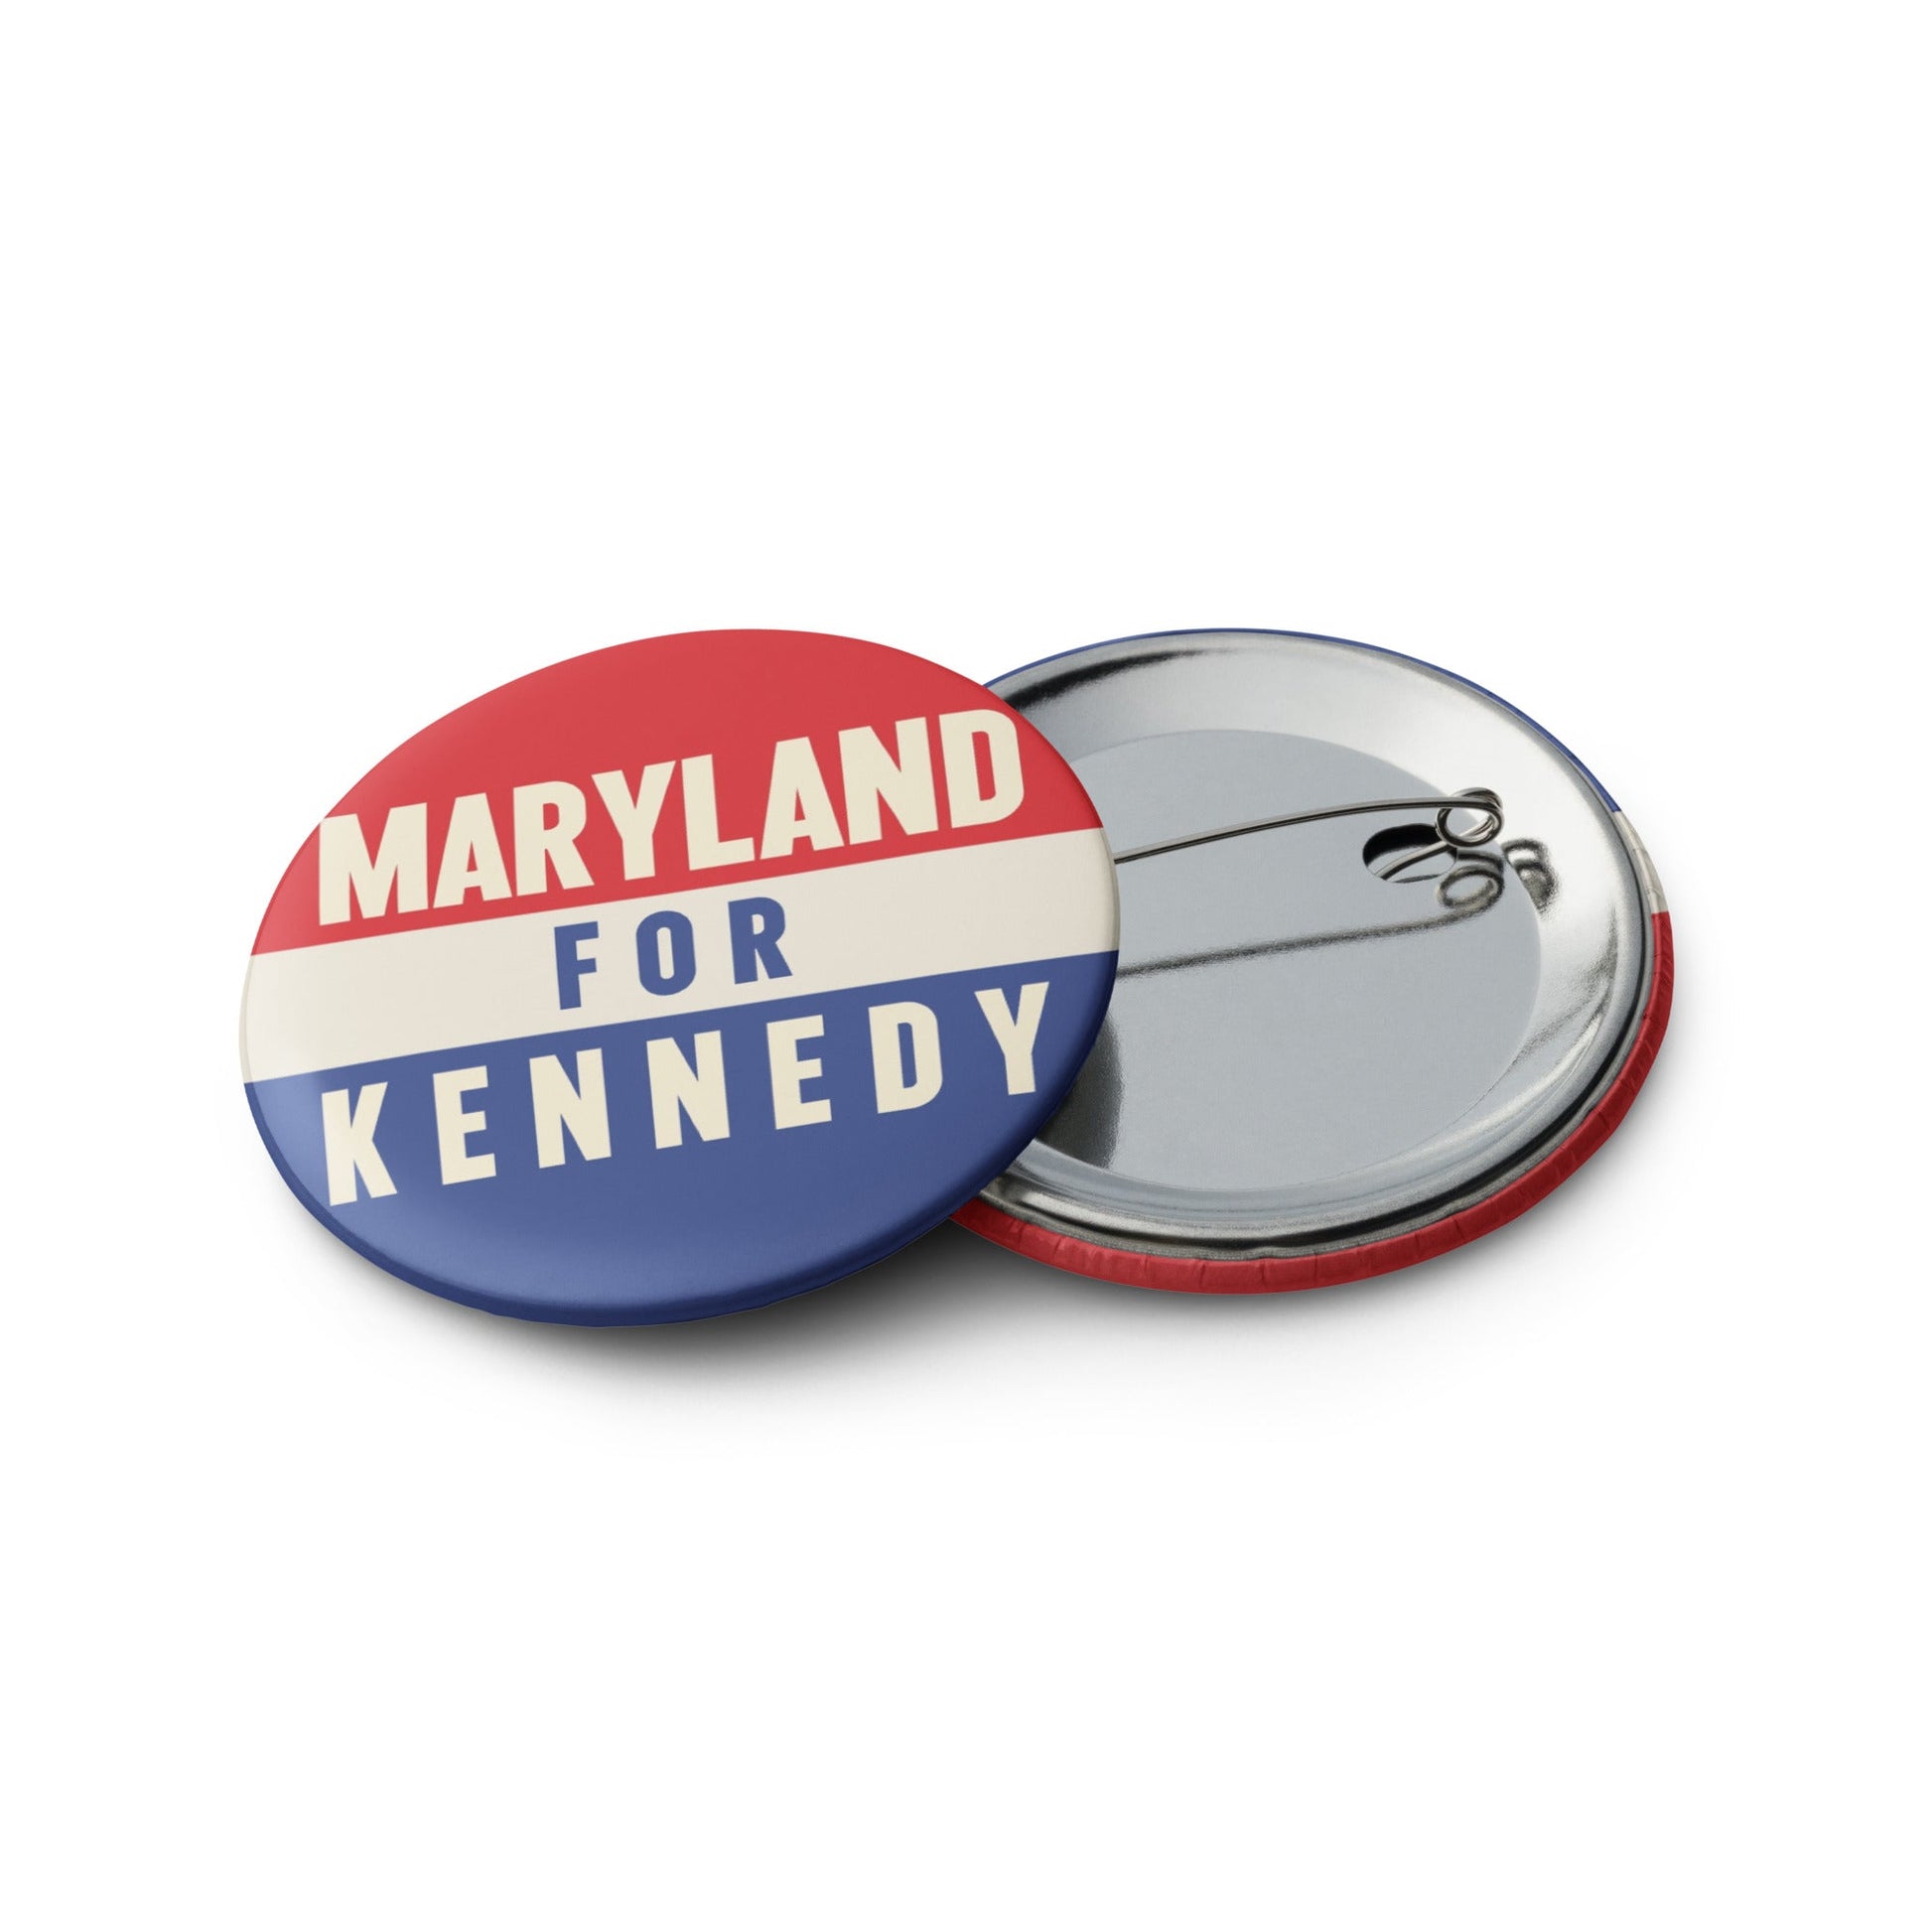 Maryland for Kennedy (5 Buttons) - TEAM KENNEDY. All rights reserved